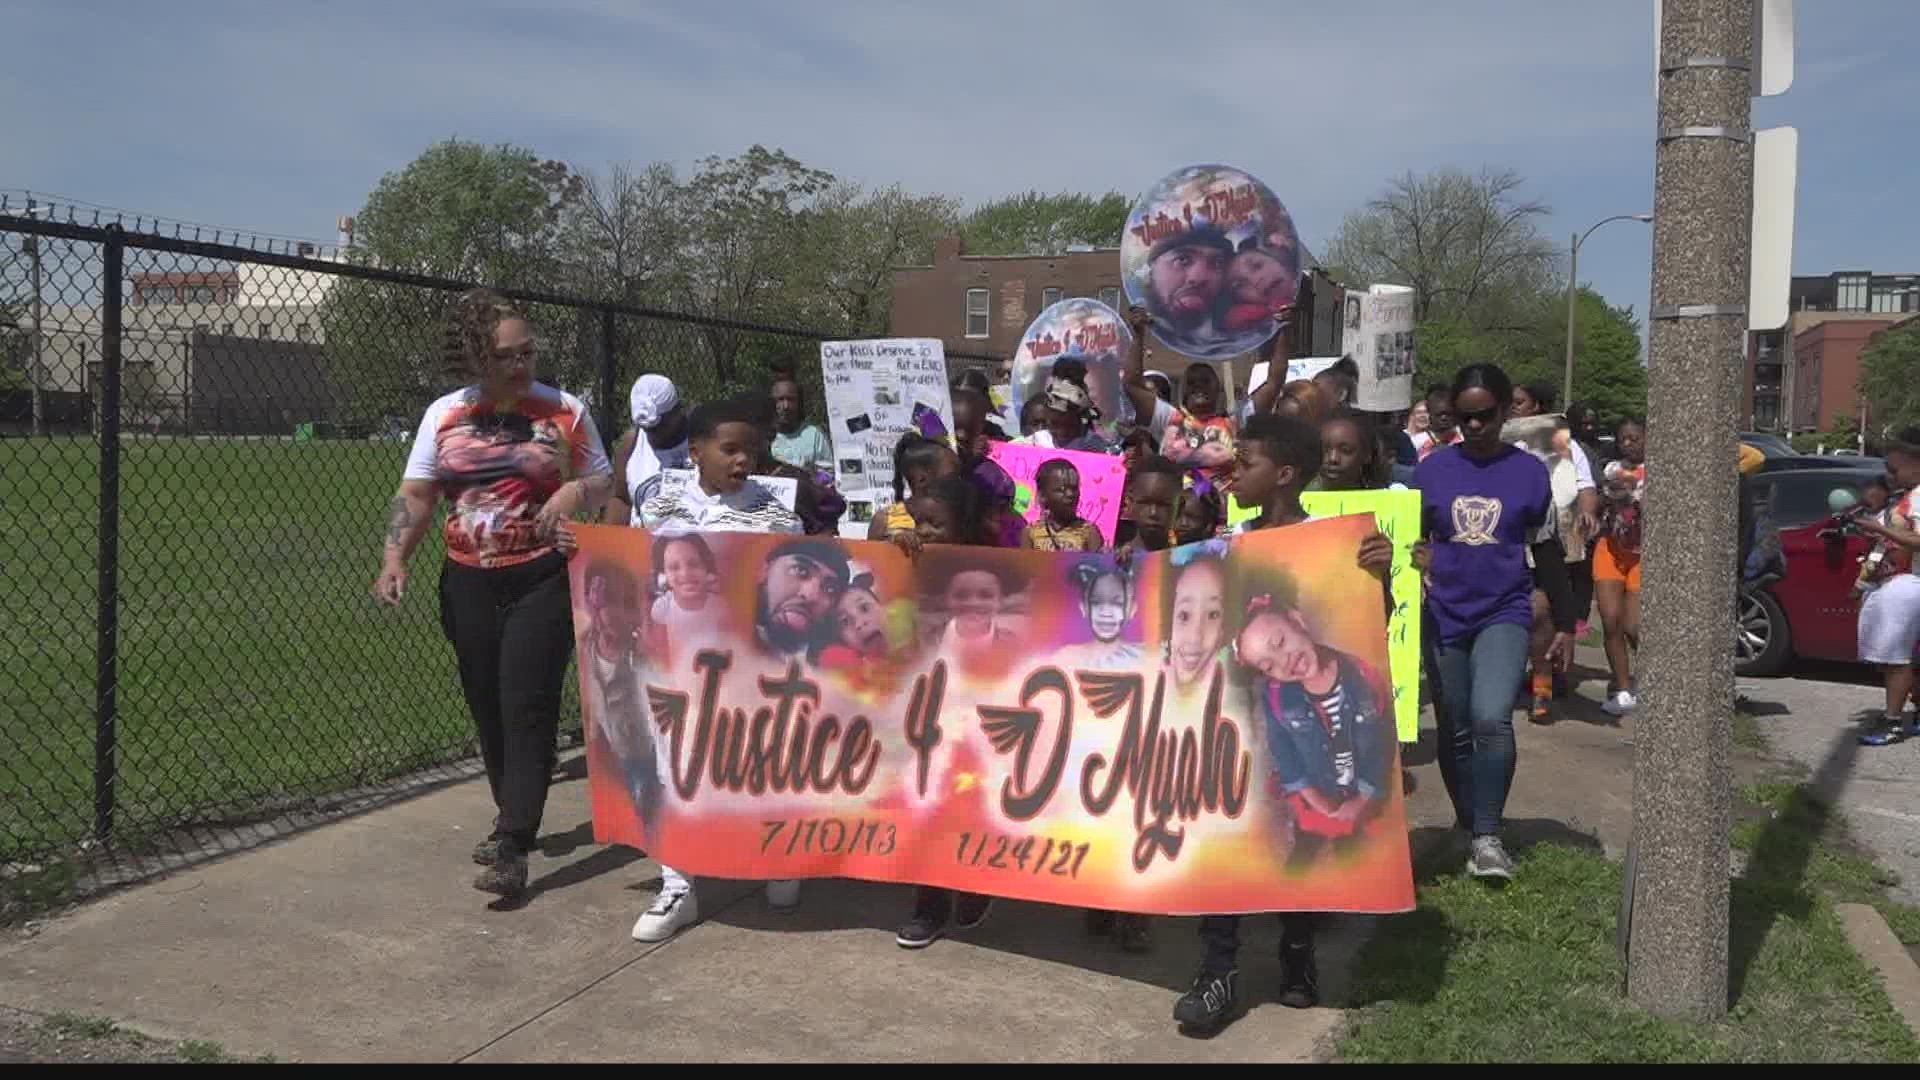 Dmyah Fleming and her father Darrion, were shot and killed in January 2021 on Laclede Avenue. Suketha Rankin and her family marched in remembrance of Dmyah,